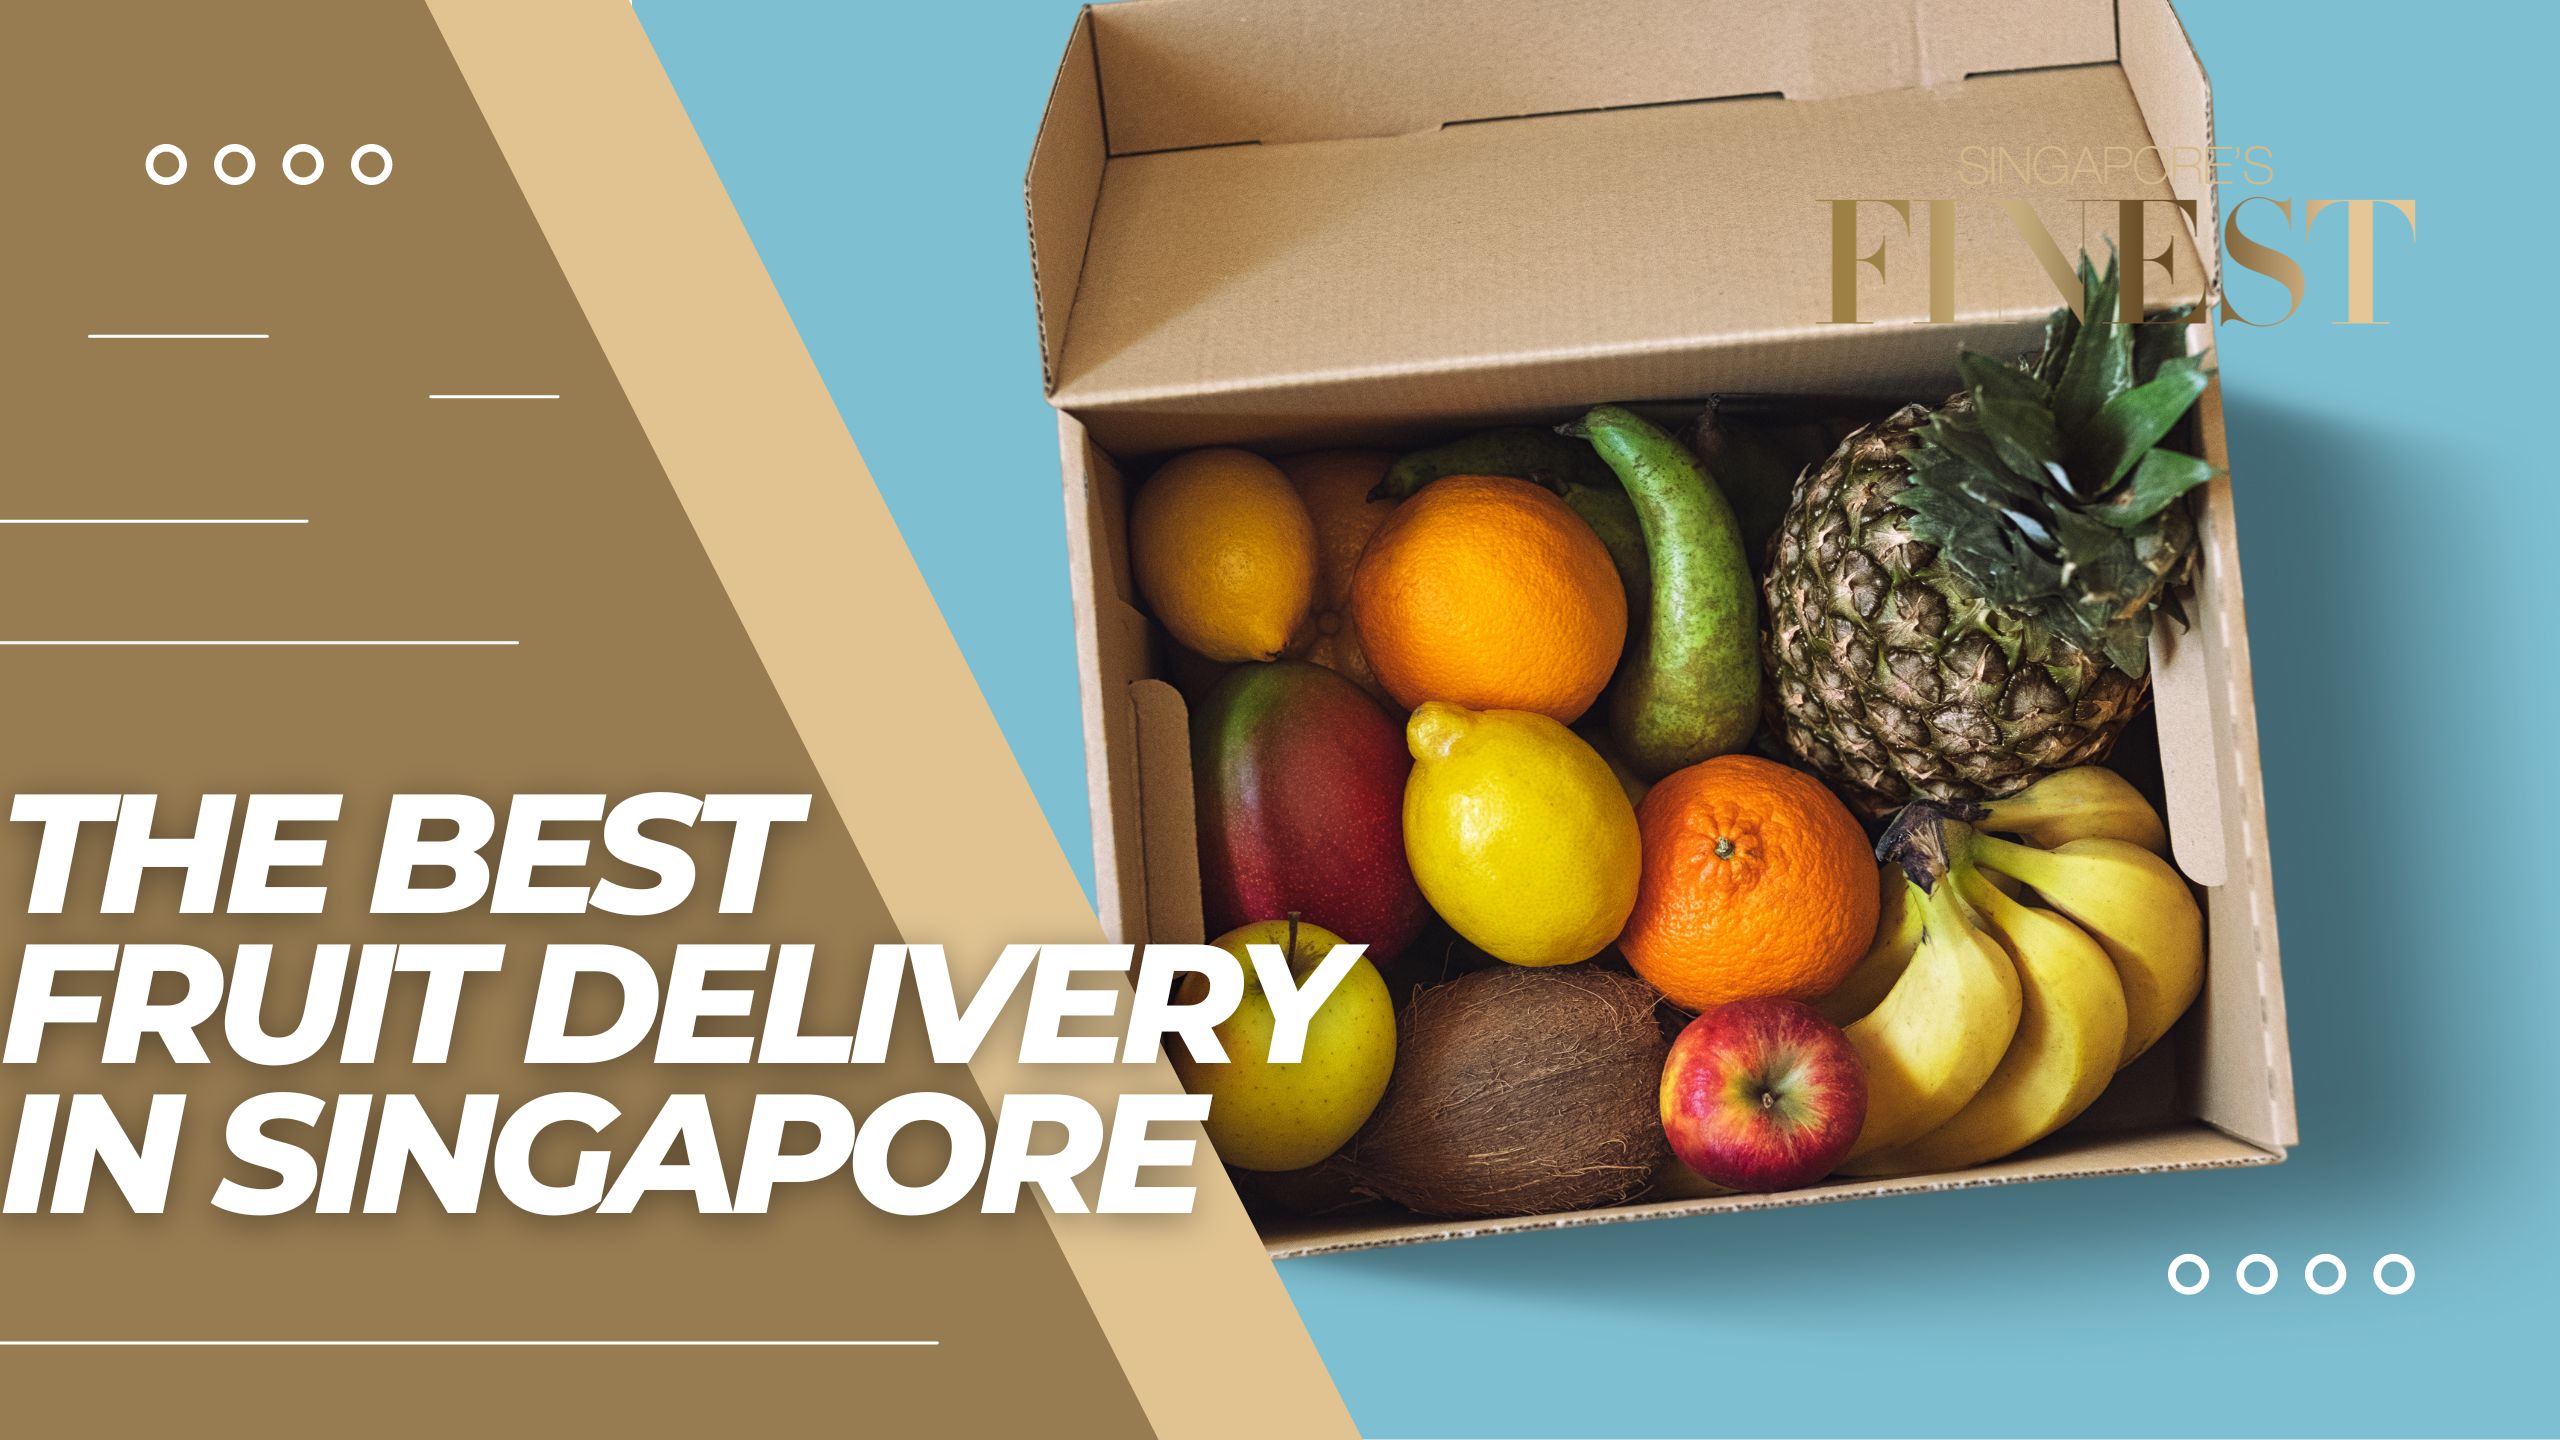 The Finest Fruit Delivery in Singapore